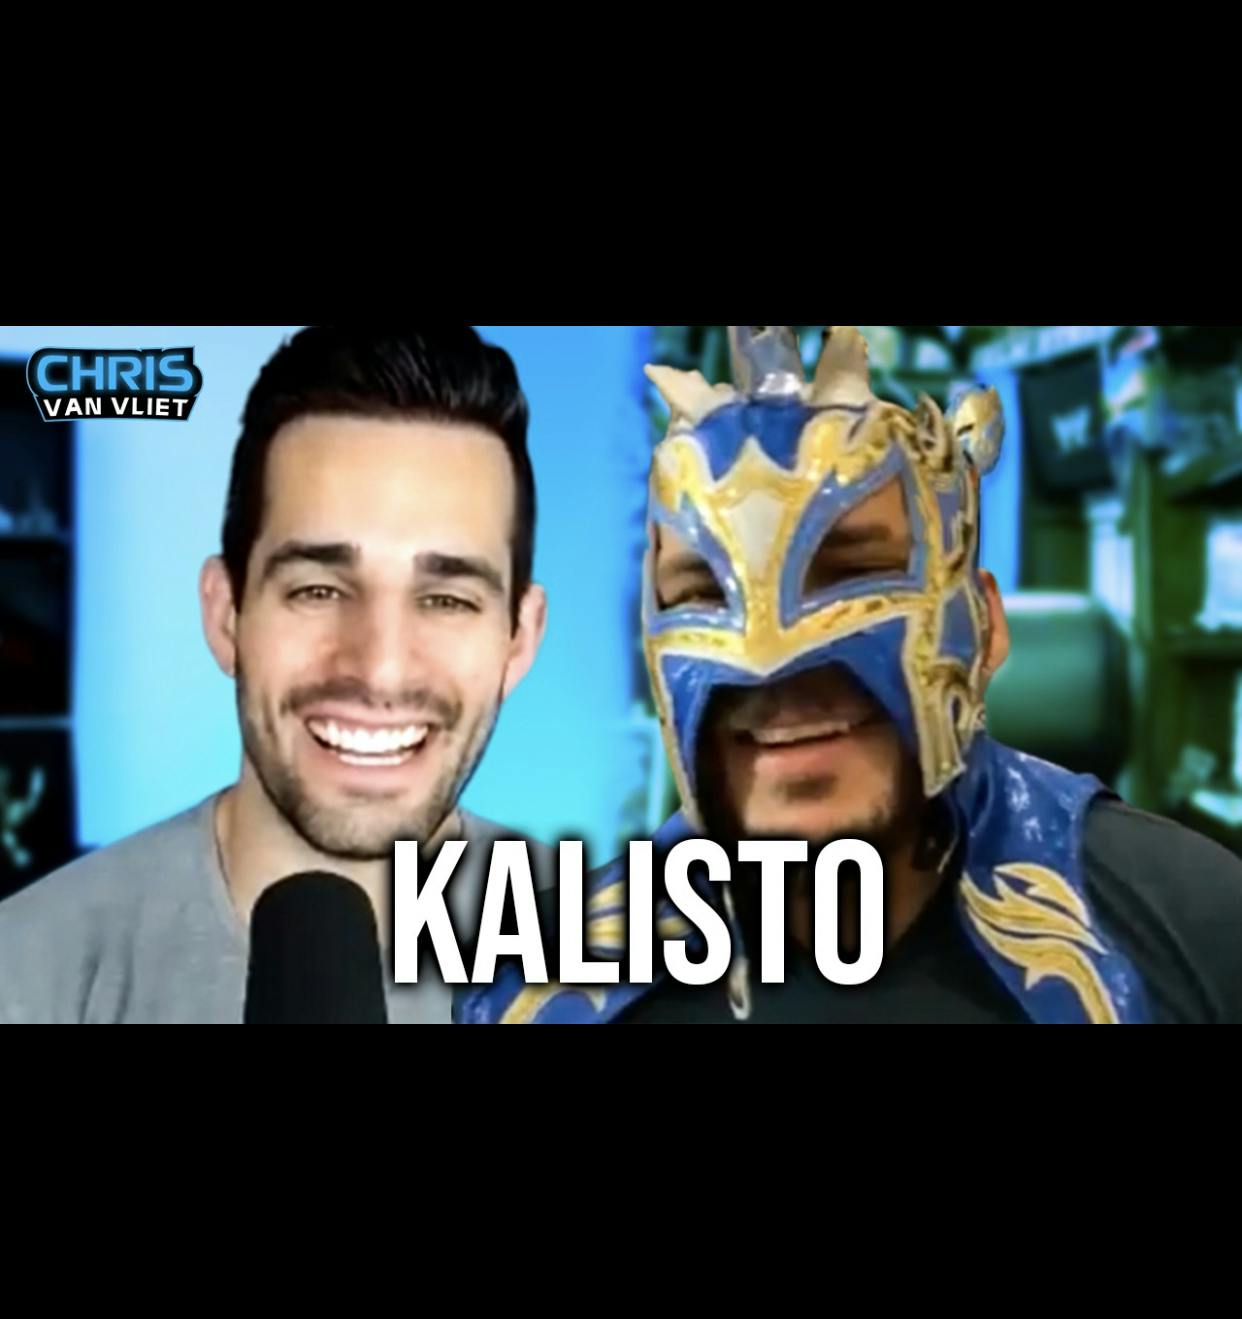 Kalisto on his WWE release, Rey Mysterio mask vs. mask match, Lucha House Party